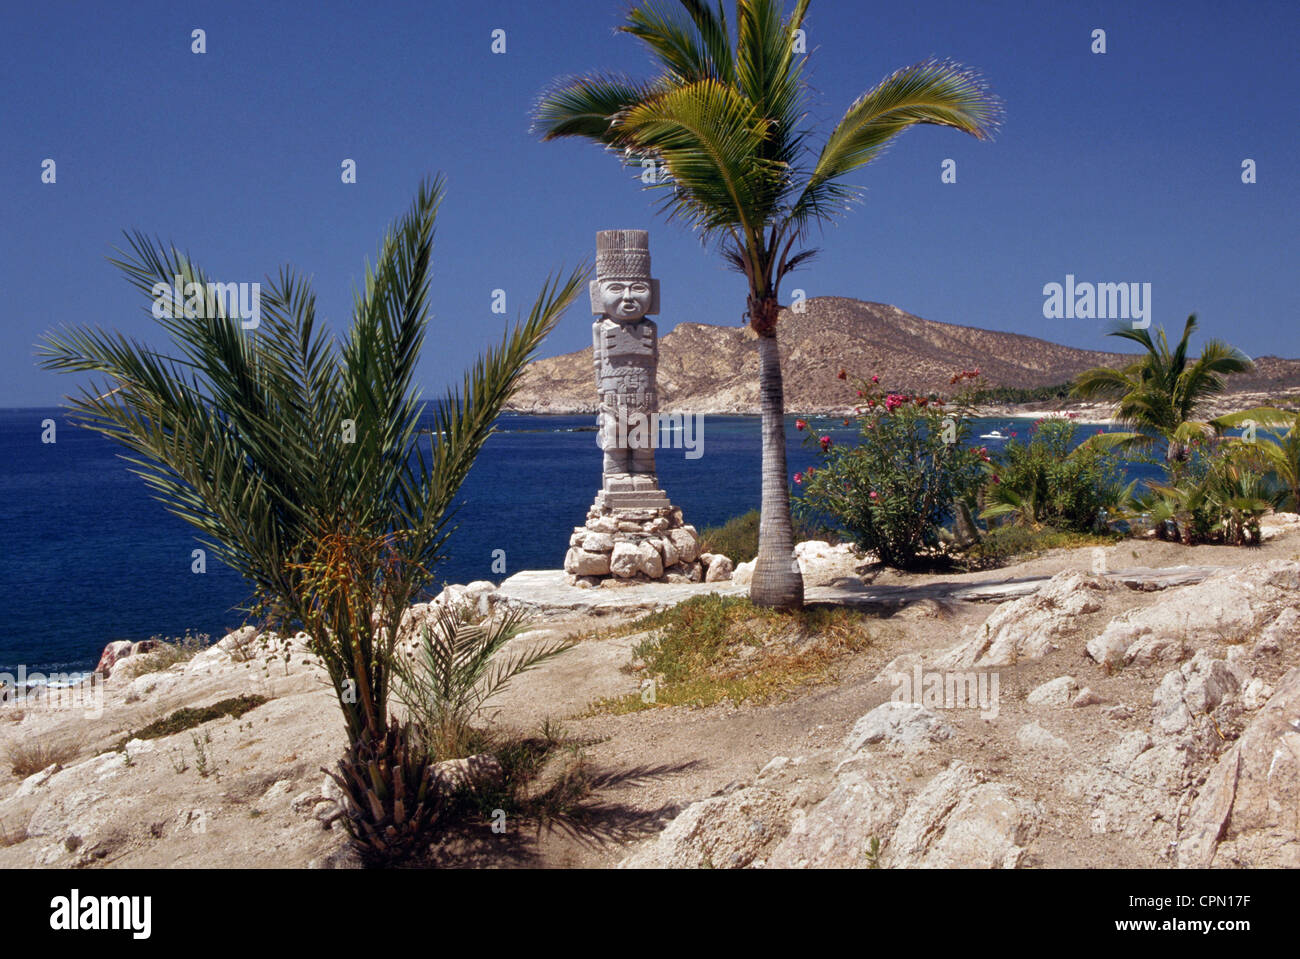 A lone stone Aztec statue stands at the edge of the Sea of Cortez in the resort city of Cabo San Lucas on the Baja California peninsula in Mexico. Stock Photo